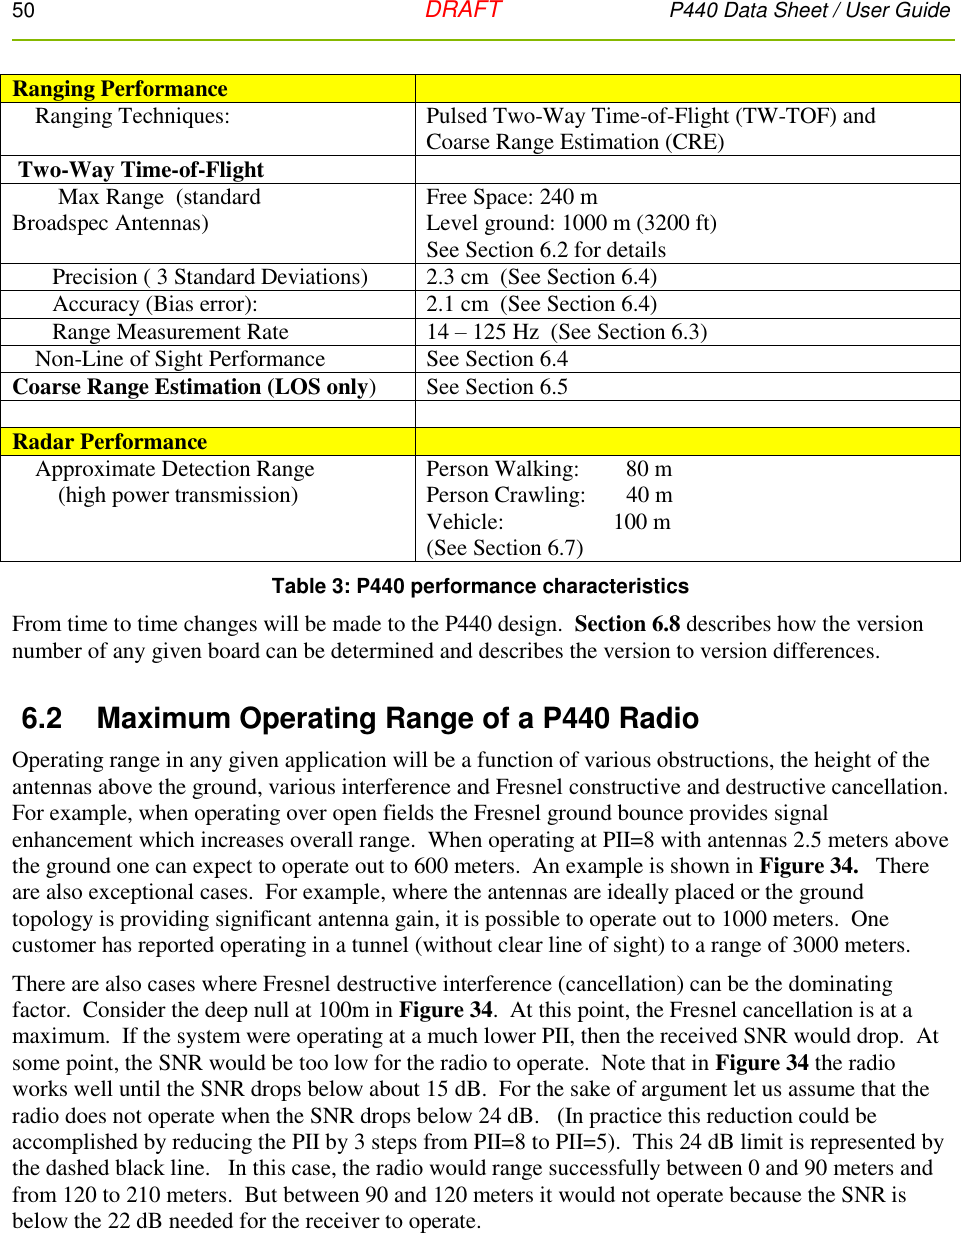 50   DRAFT P440 Data Sheet / User Guide  Ranging Performance      Ranging Techniques: Pulsed Two-Way Time-of-Flight (TW-TOF) and  Coarse Range Estimation (CRE)  Two-Way Time-of-Flight          Max Range  (standard Broadspec Antennas)  Free Space: 240 m Level ground: 1000 m (3200 ft)   See Section 6.2 for details        Precision ( 3 Standard Deviations) 2.3 cm  (See Section 6.4)        Accuracy (Bias error): 2.1 cm  (See Section 6.4)        Range Measurement Rate  14 – 125 Hz  (See Section 6.3)     Non-Line of Sight Performance See Section 6.4 Coarse Range Estimation (LOS only) See Section 6.5   Radar Performance      Approximate Detection Range             (high power transmission) Person Walking:        80 m Person Crawling:       40 m Vehicle:                   100 m (See Section 6.7) Table 3: P440 performance characteristics From time to time changes will be made to the P440 design.  Section 6.8 describes how the version number of any given board can be determined and describes the version to version differences.  6.2  Maximum Operating Range of a P440 Radio  Operating range in any given application will be a function of various obstructions, the height of the antennas above the ground, various interference and Fresnel constructive and destructive cancellation.  For example, when operating over open fields the Fresnel ground bounce provides signal enhancement which increases overall range.  When operating at PII=8 with antennas 2.5 meters above the ground one can expect to operate out to 600 meters.  An example is shown in Figure 34.   There are also exceptional cases.  For example, where the antennas are ideally placed or the ground topology is providing significant antenna gain, it is possible to operate out to 1000 meters.  One customer has reported operating in a tunnel (without clear line of sight) to a range of 3000 meters. There are also cases where Fresnel destructive interference (cancellation) can be the dominating factor.  Consider the deep null at 100m in Figure 34.  At this point, the Fresnel cancellation is at a maximum.  If the system were operating at a much lower PII, then the received SNR would drop.  At some point, the SNR would be too low for the radio to operate.  Note that in Figure 34 the radio works well until the SNR drops below about 15 dB.  For the sake of argument let us assume that the radio does not operate when the SNR drops below 24 dB.   (In practice this reduction could be accomplished by reducing the PII by 3 steps from PII=8 to PII=5).  This 24 dB limit is represented by the dashed black line.   In this case, the radio would range successfully between 0 and 90 meters and from 120 to 210 meters.  But between 90 and 120 meters it would not operate because the SNR is below the 22 dB needed for the receiver to operate. 